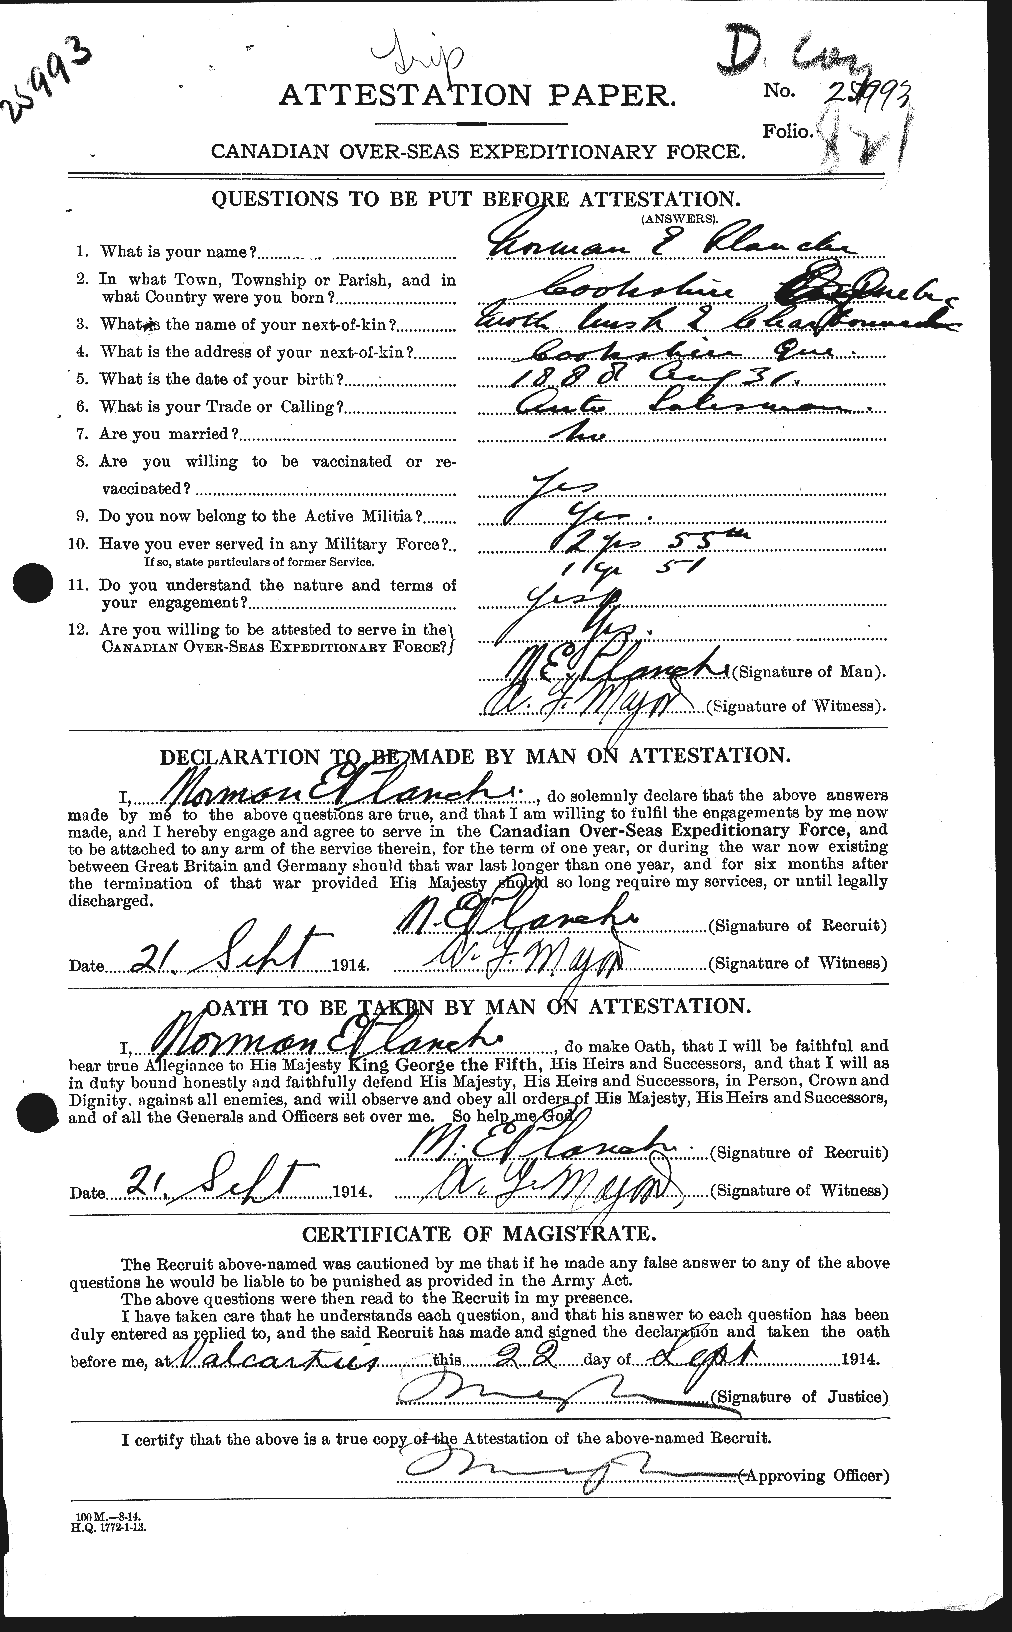 Personnel Records of the First World War - CEF 585483a